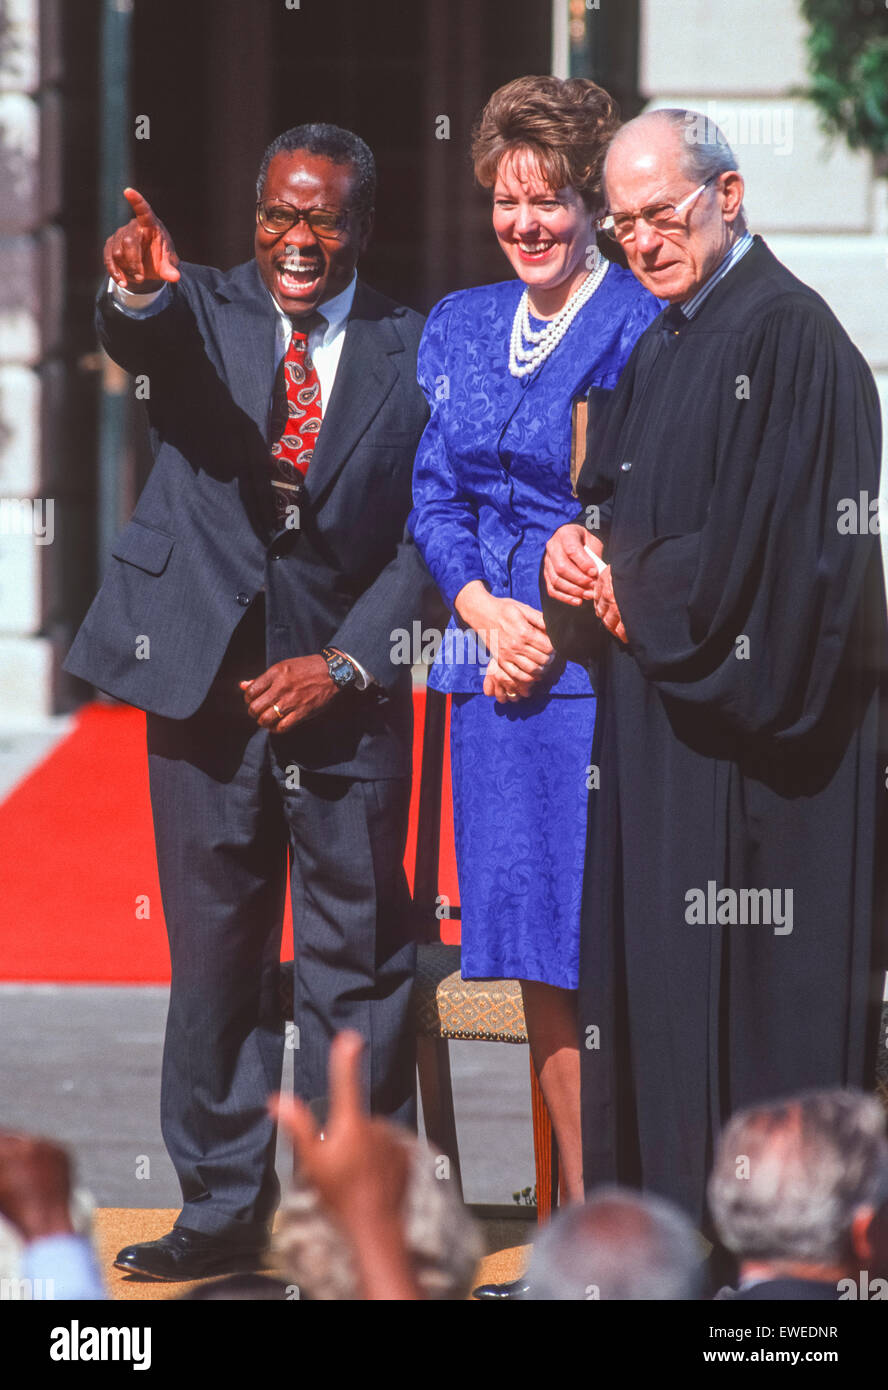 WASHINGTON, DC, USA - Clarence Thomas, Supreme Court nominee, swearing in ceremony at White House. With wife Virginia and Associate Justice Byron White. October 18, 1991 Stock Photo